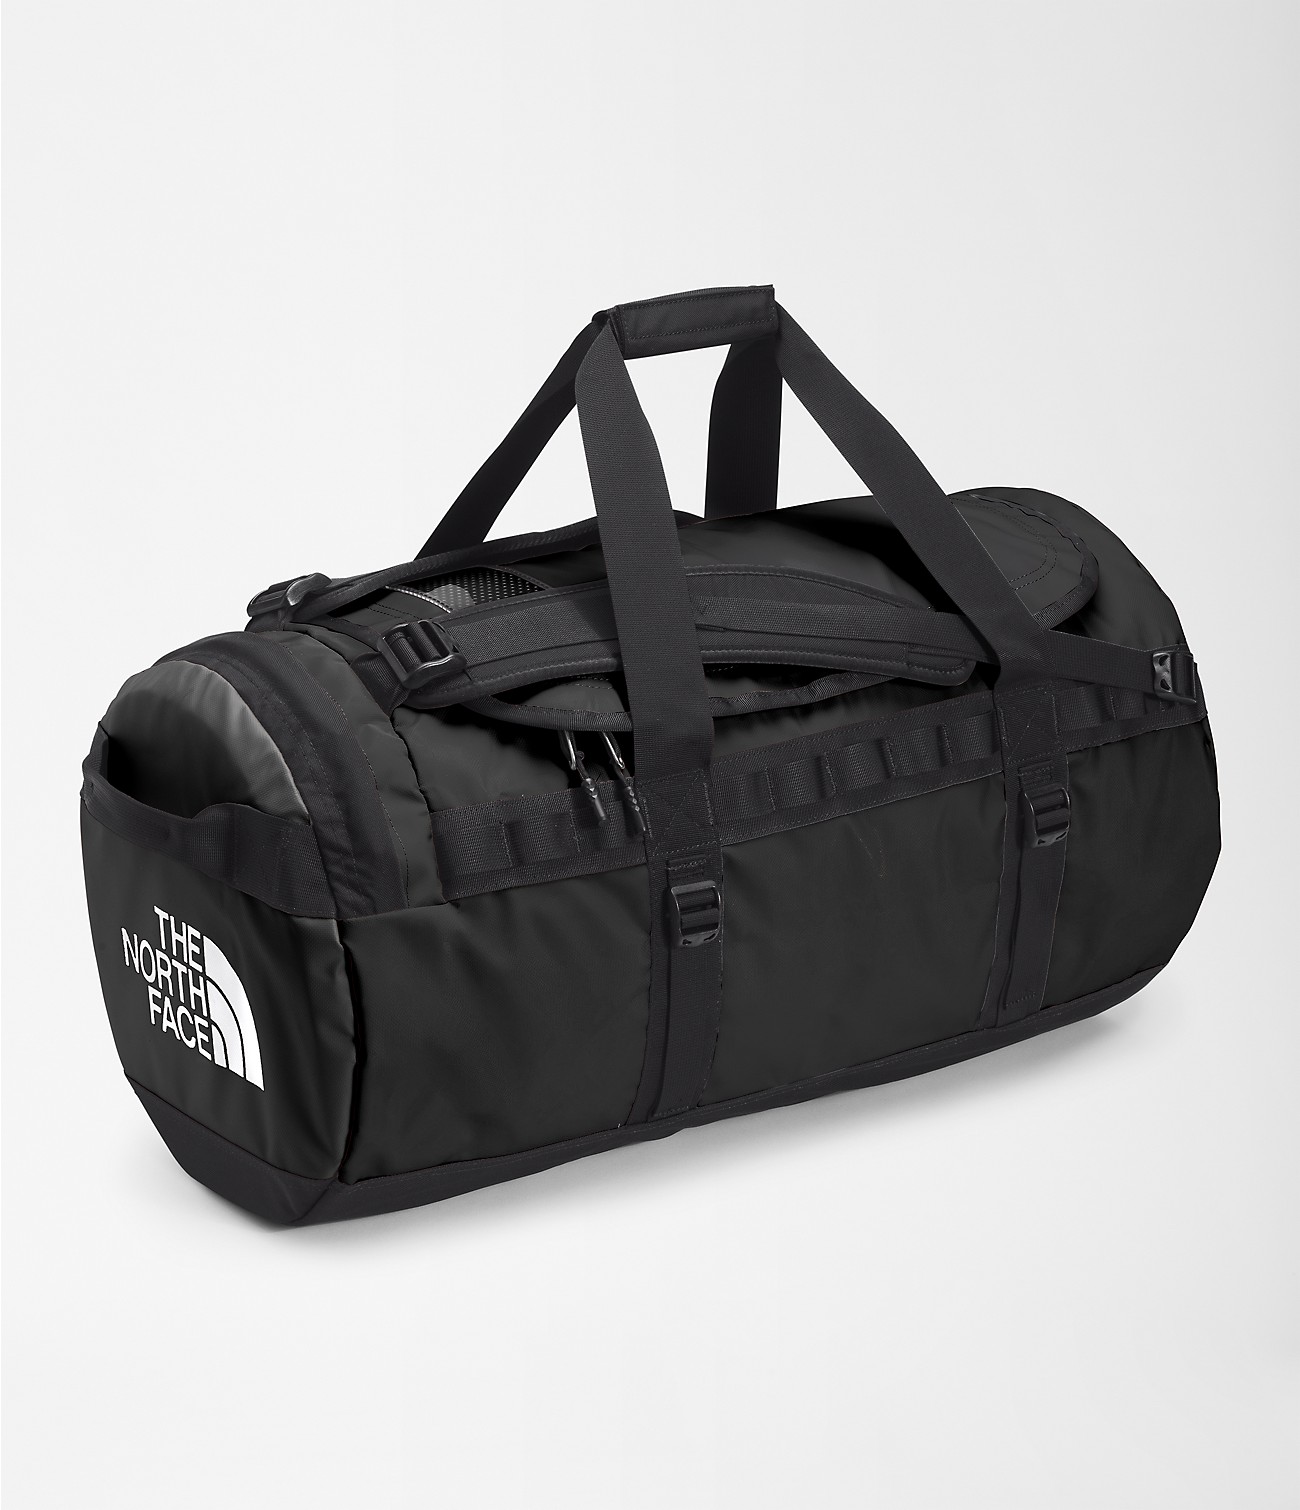 Unlock Wilderness' choice in the Thule Vs North Face comparison, the Base Camp Duffel—M by The North Face